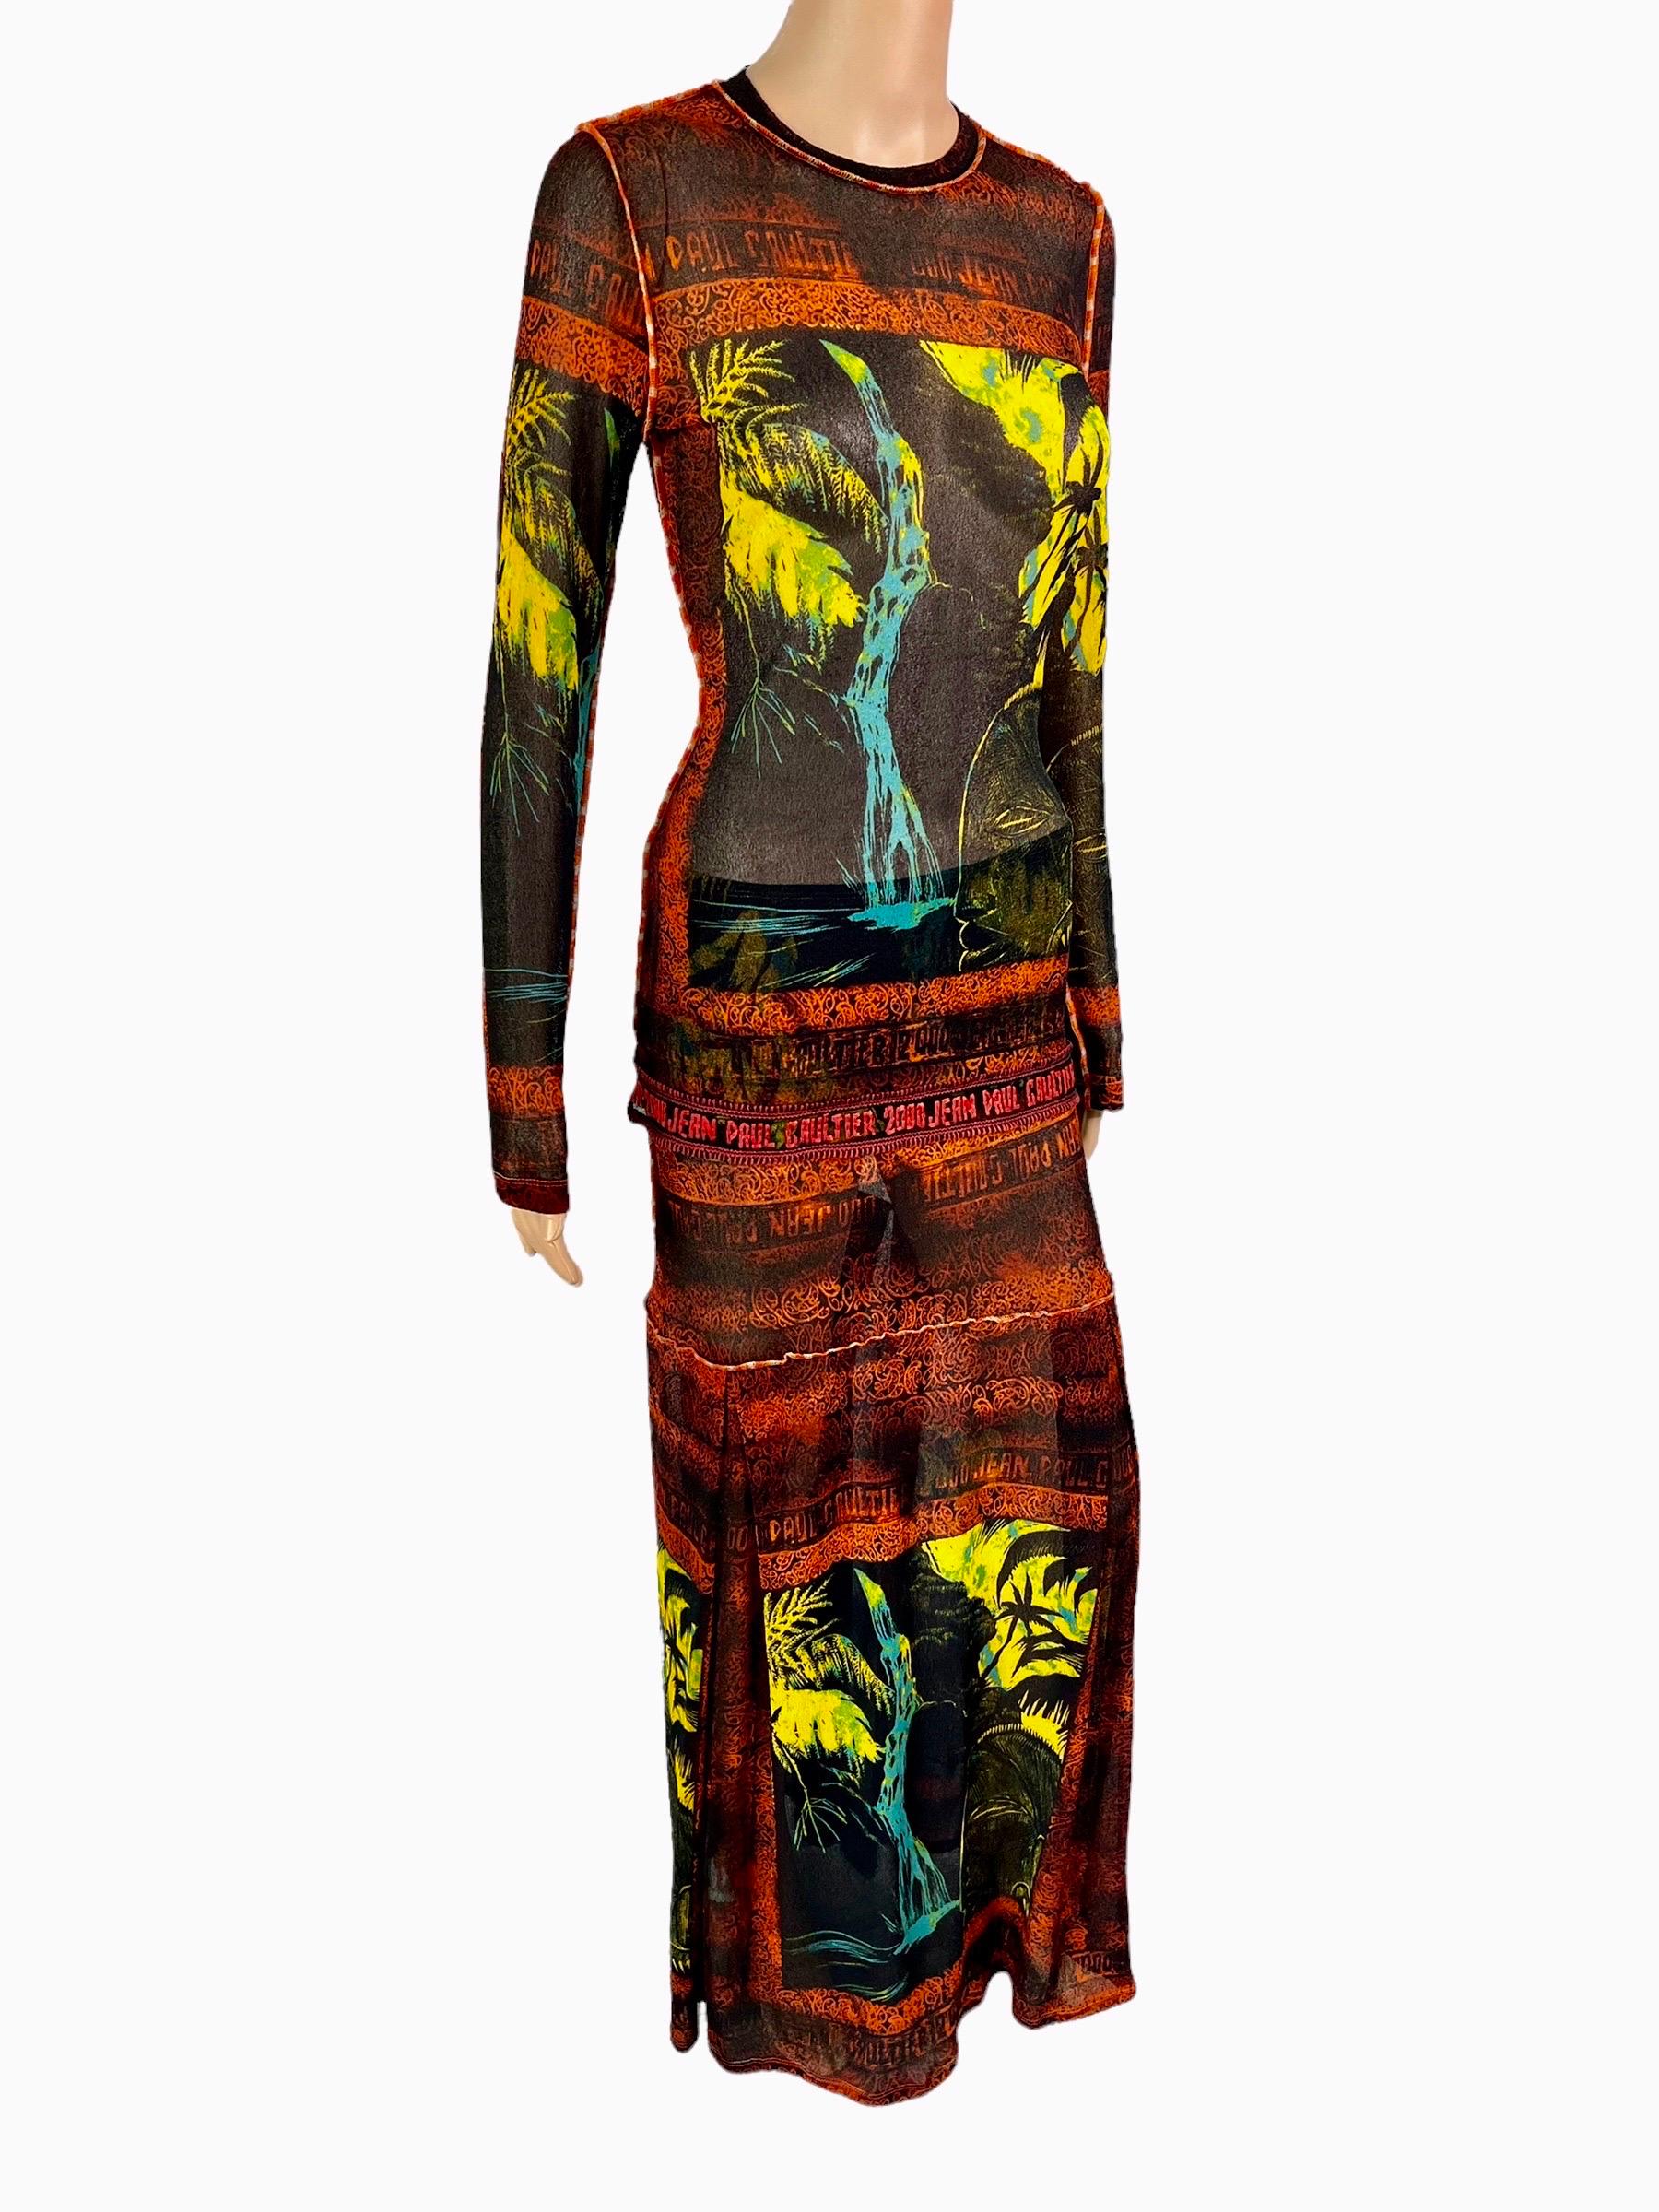 Jean Paul Gaultier Classique S/S 2000 Abstract Top & Skirt Ensemble 2 Piece Set In Good Condition For Sale In Naples, FL